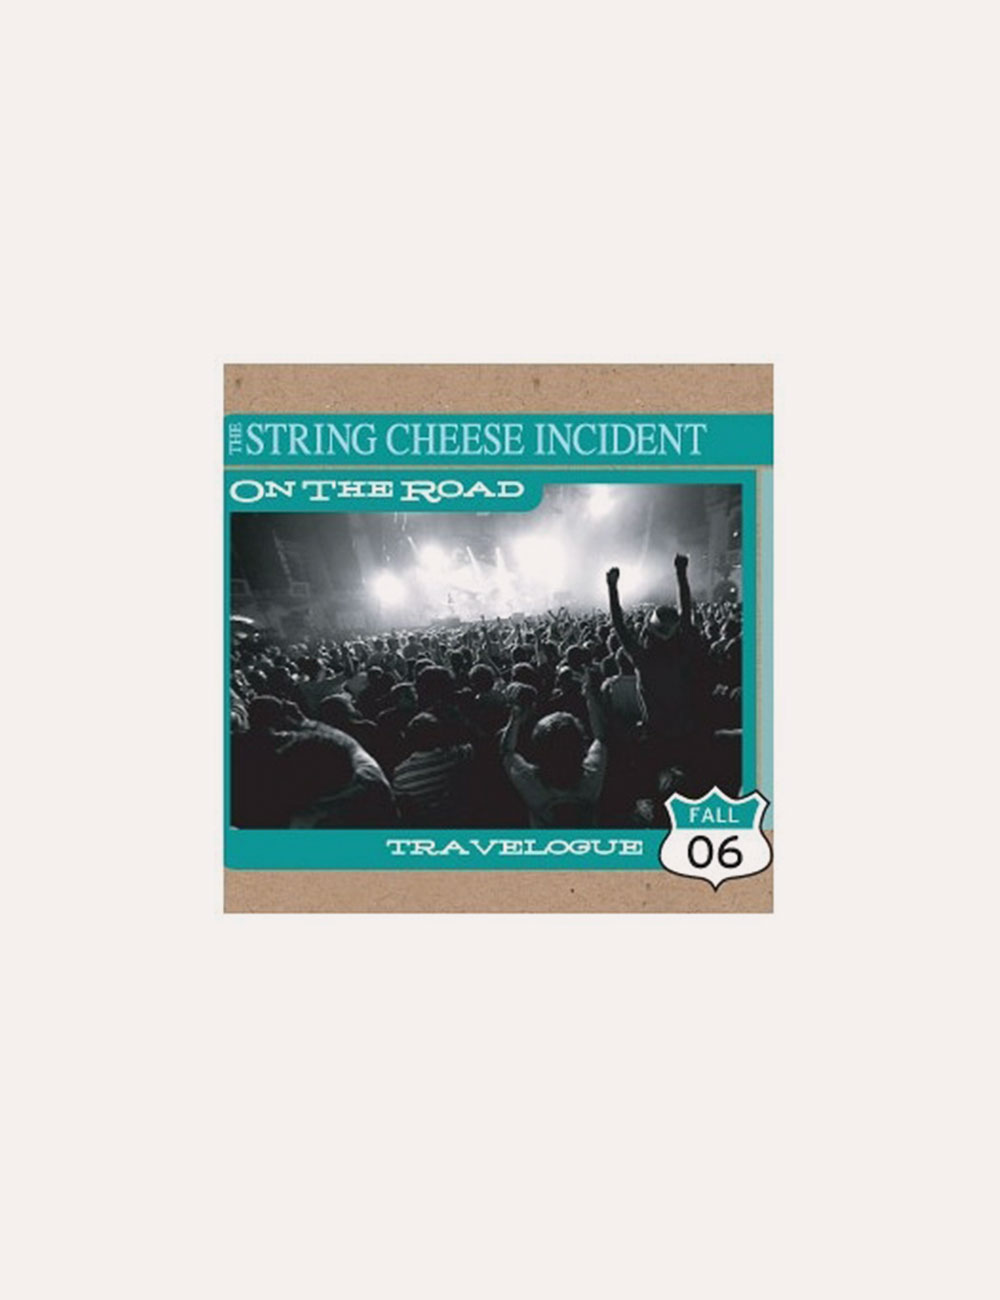 The String Cheese Incident - Merch - Music - Travelogue Fall '06 CD